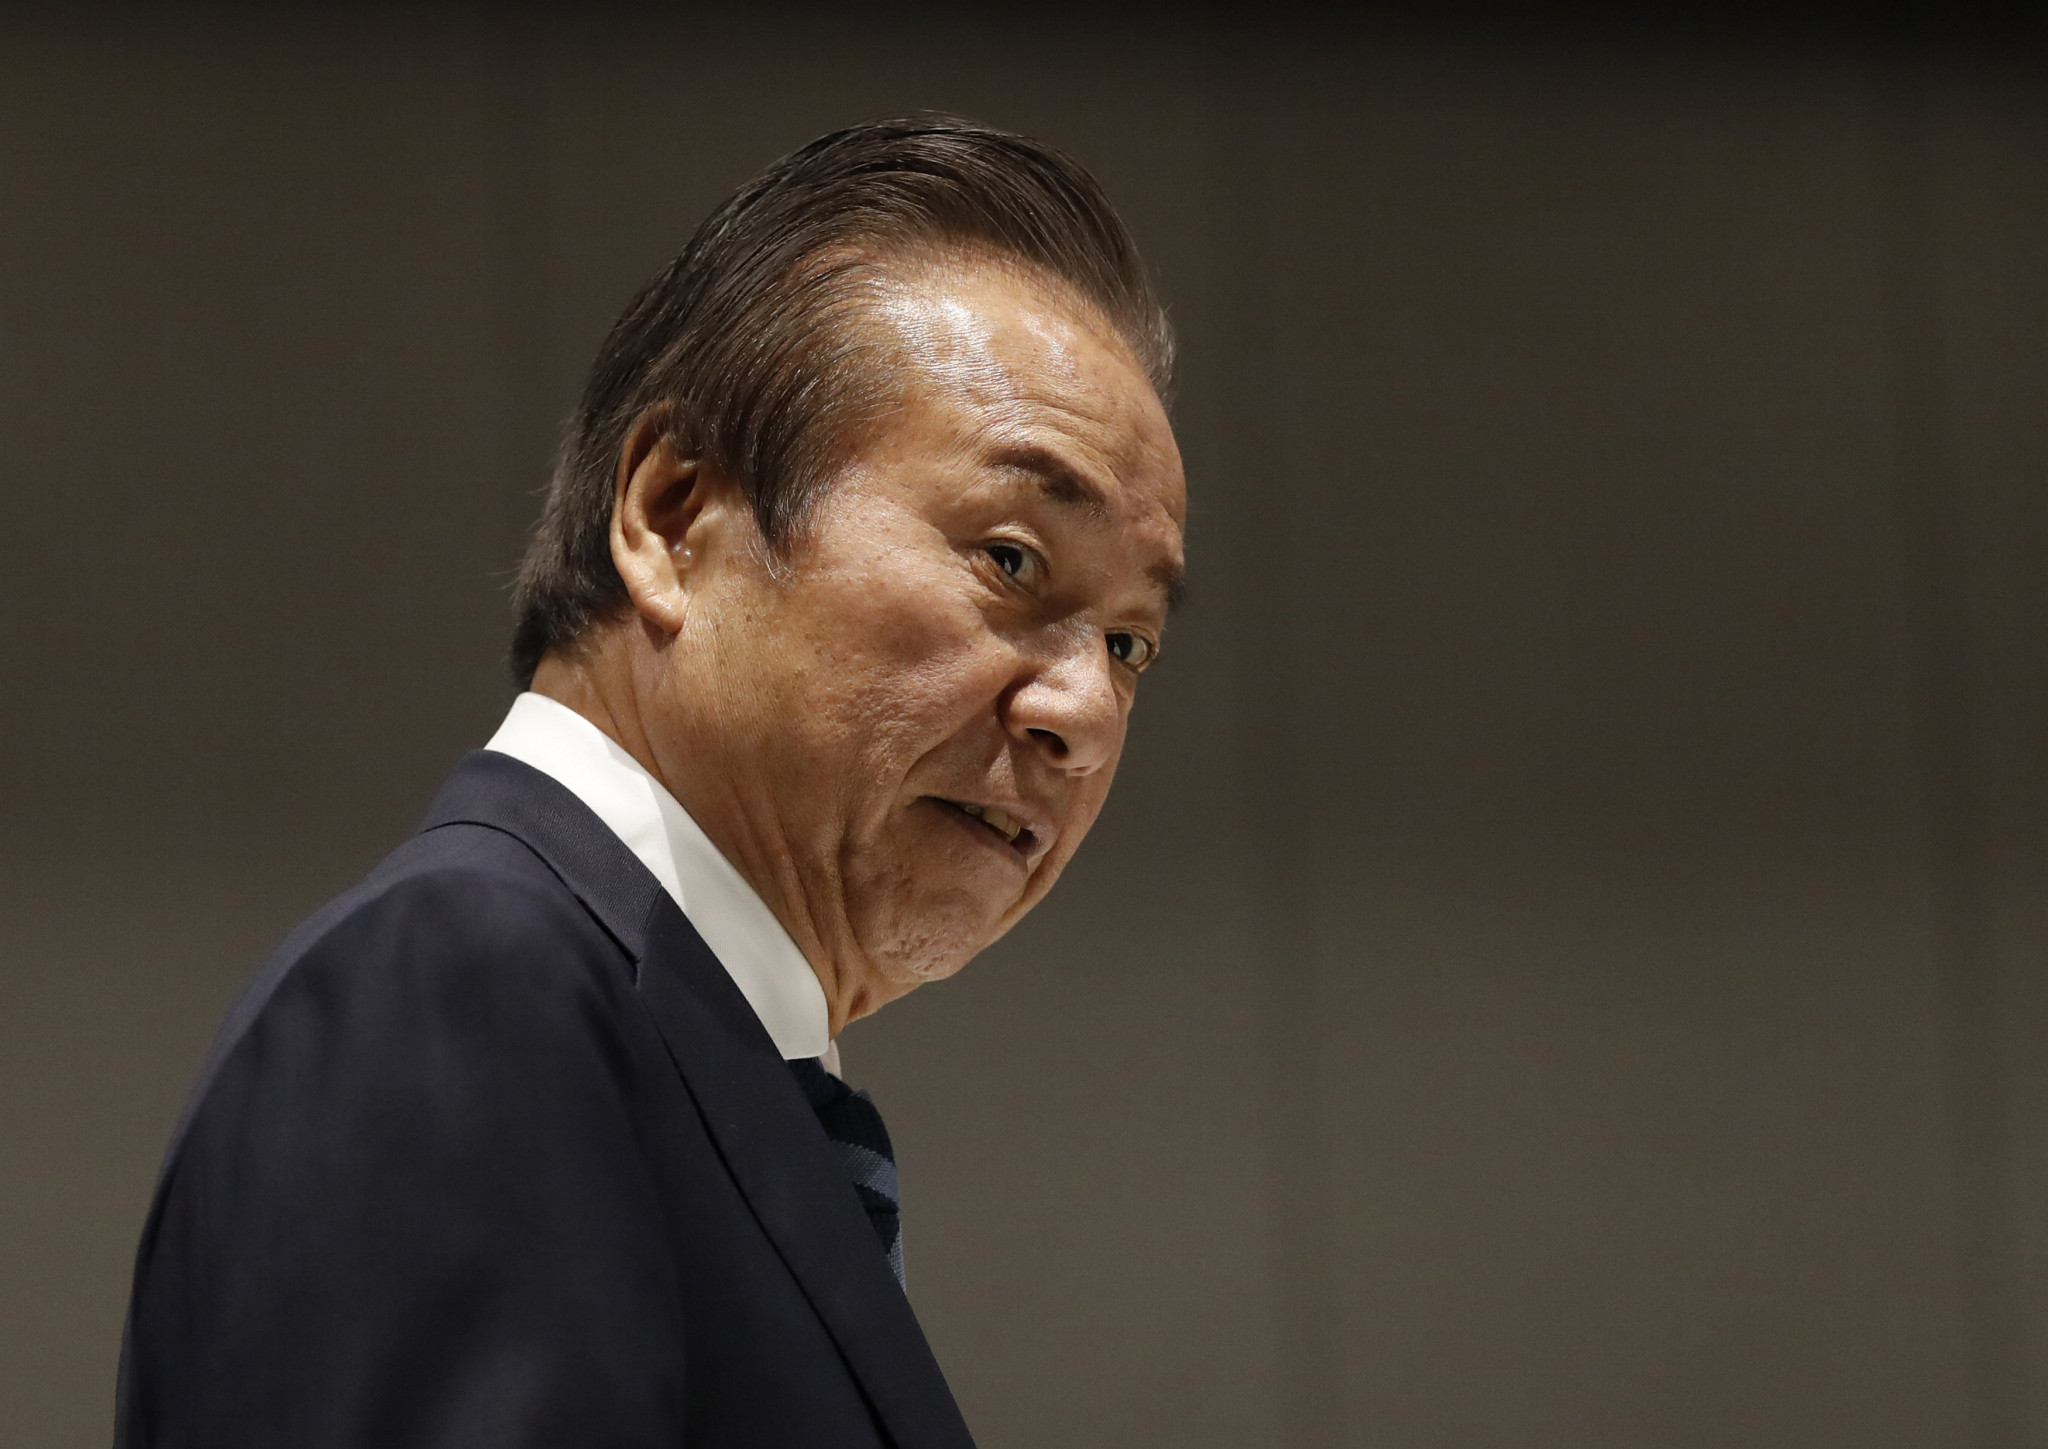 Former Tokyo 2020 Executive Board member Haruyuki Takahashi faces a fourth charge of bribery ©Getty Images